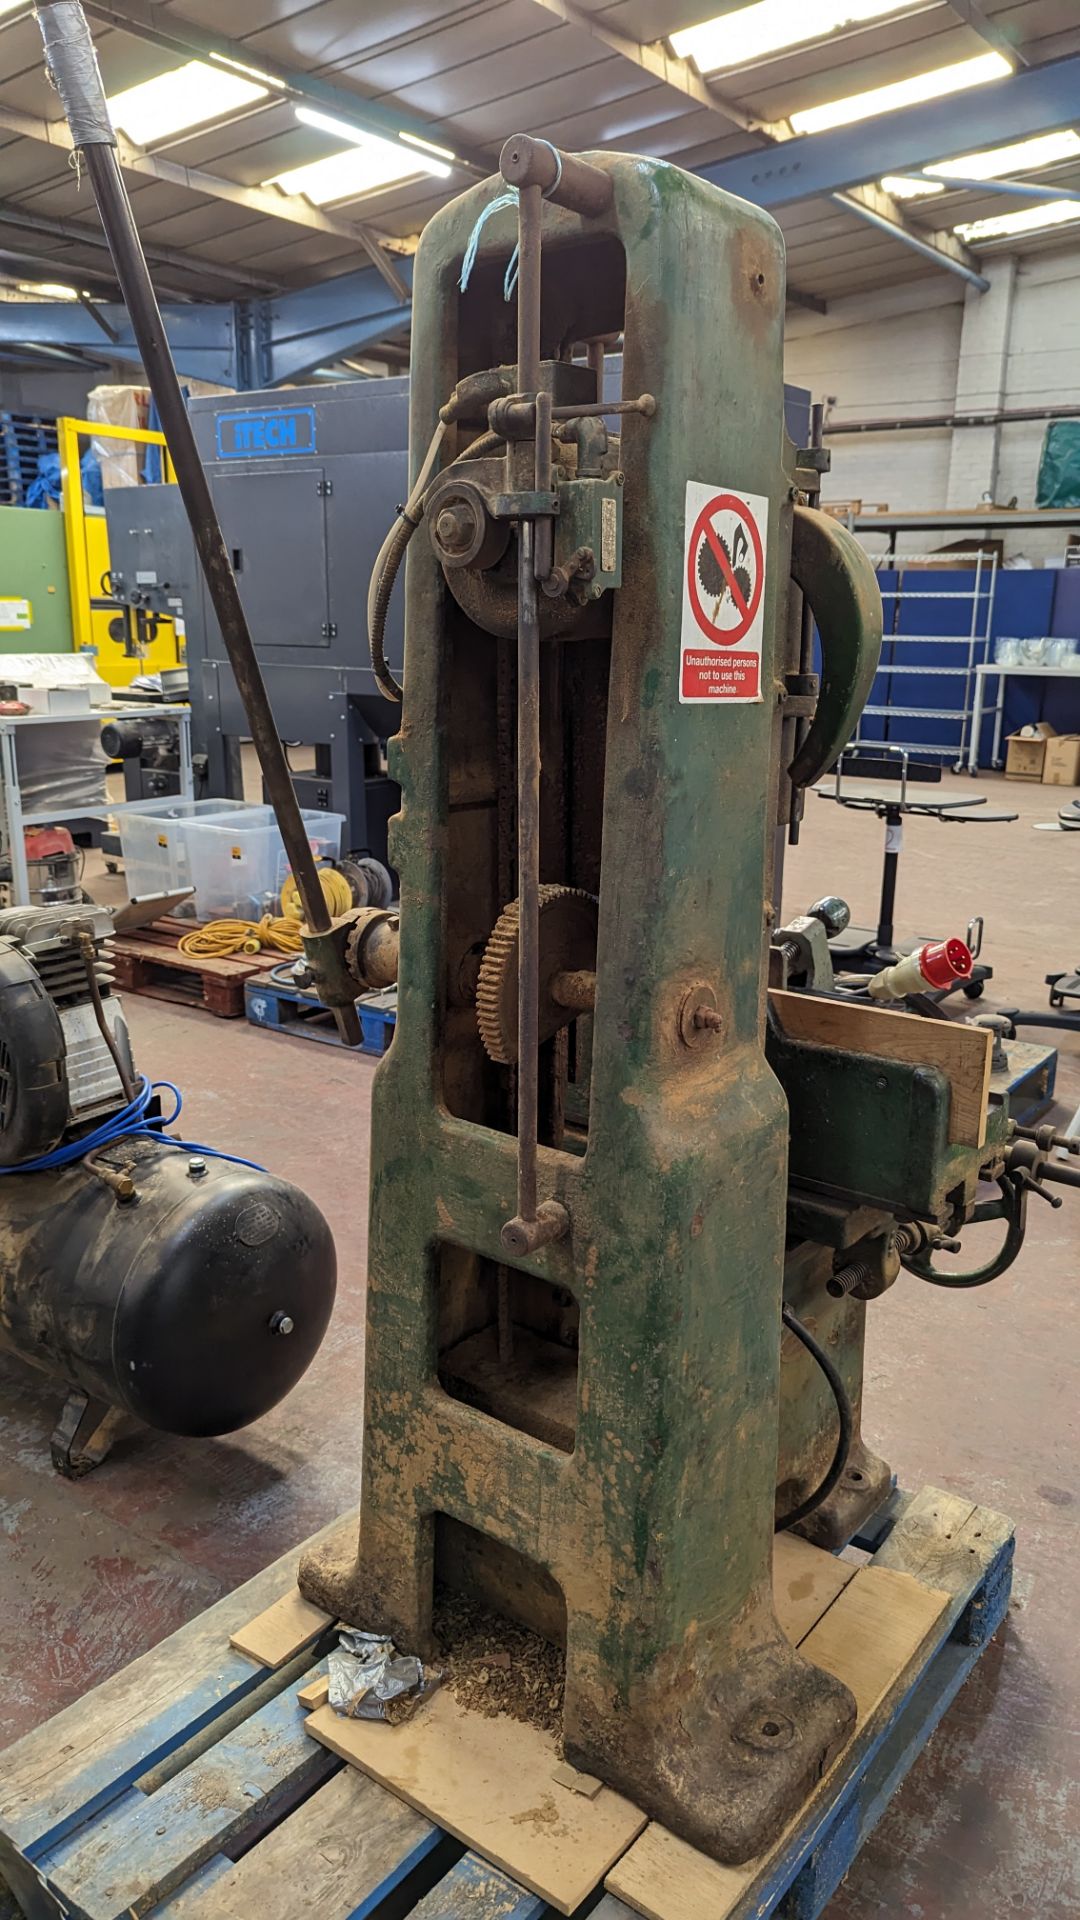 Smith floor standing morticer - Image 11 of 11